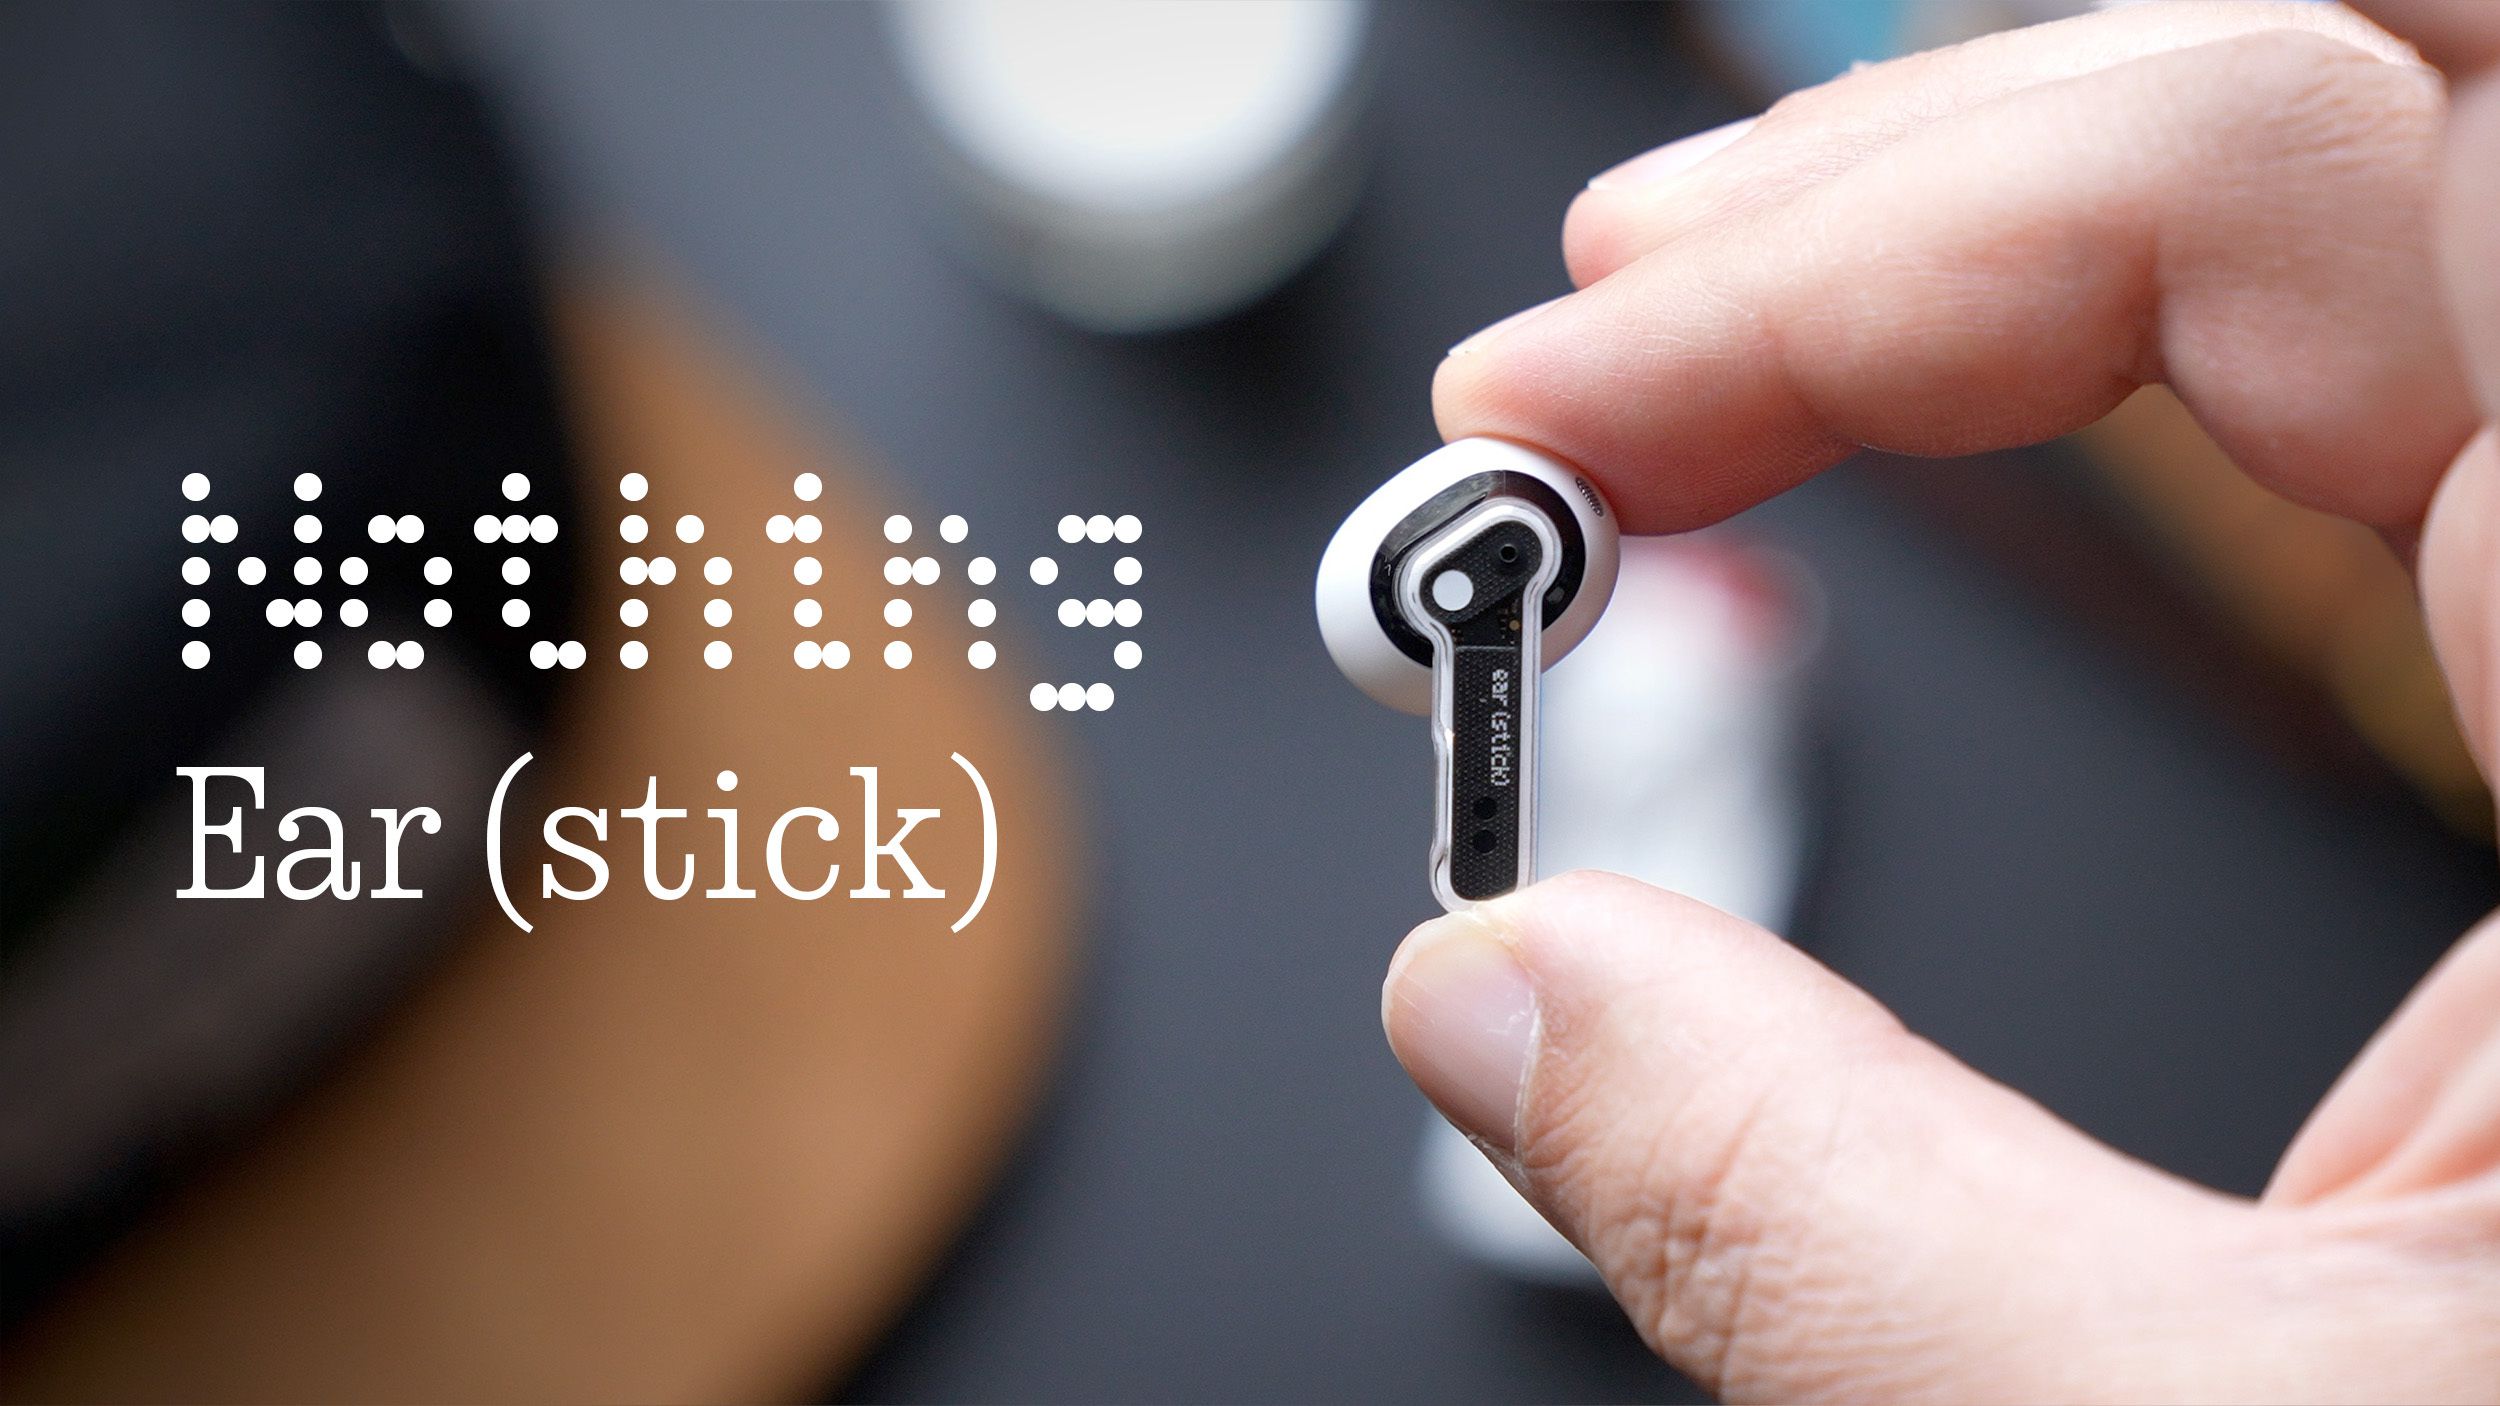 Hands-On With the $99 Nothing Ear Stick